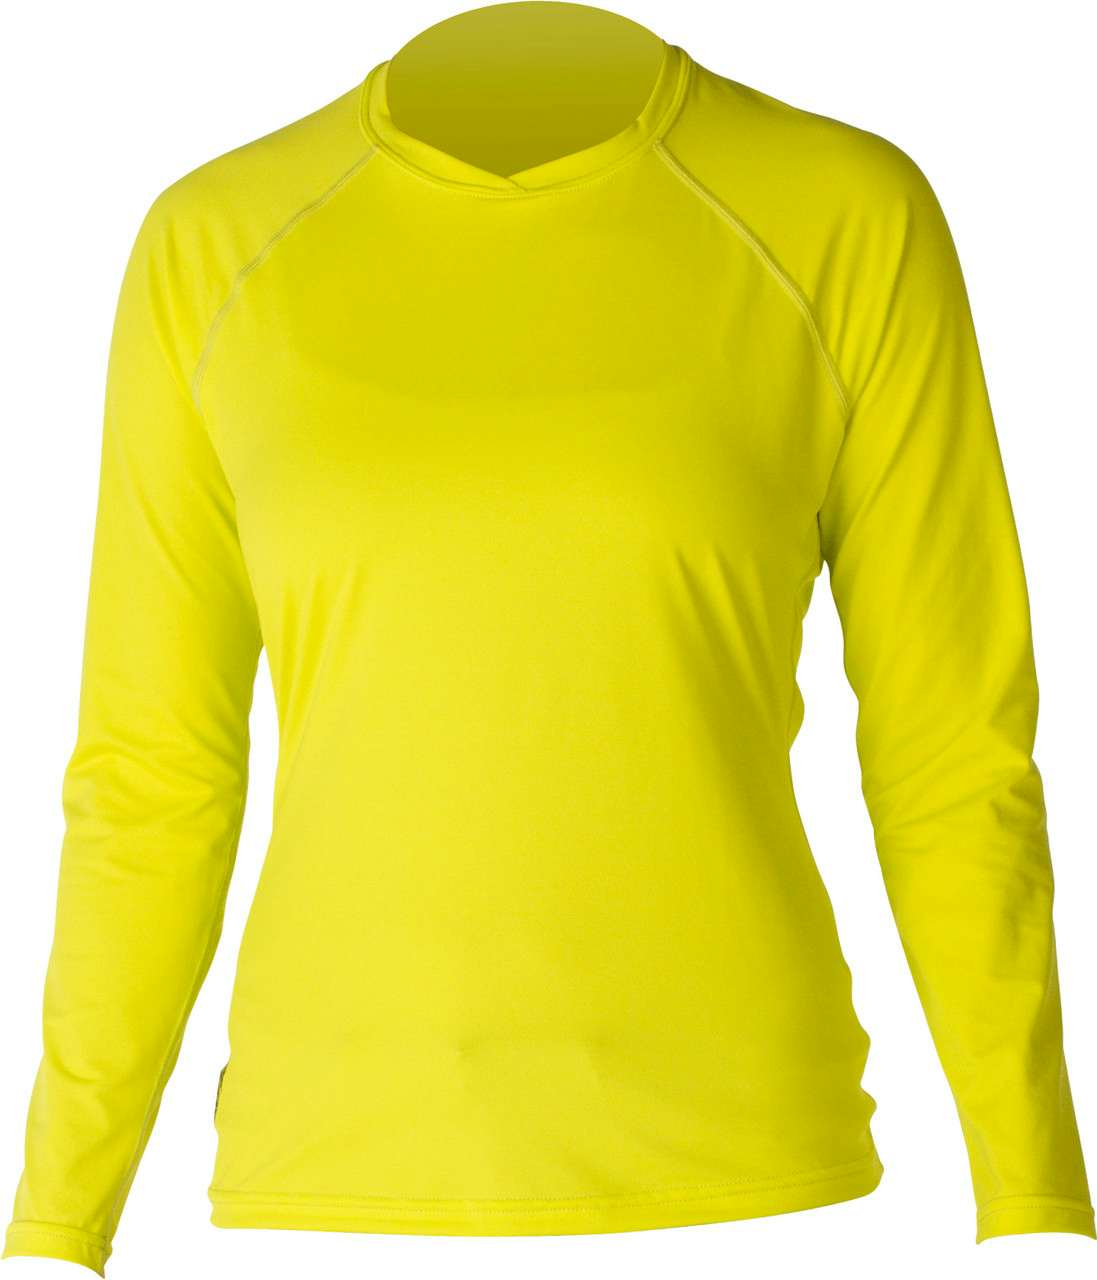 Ventx Long Sleeve Top Safety Yellow